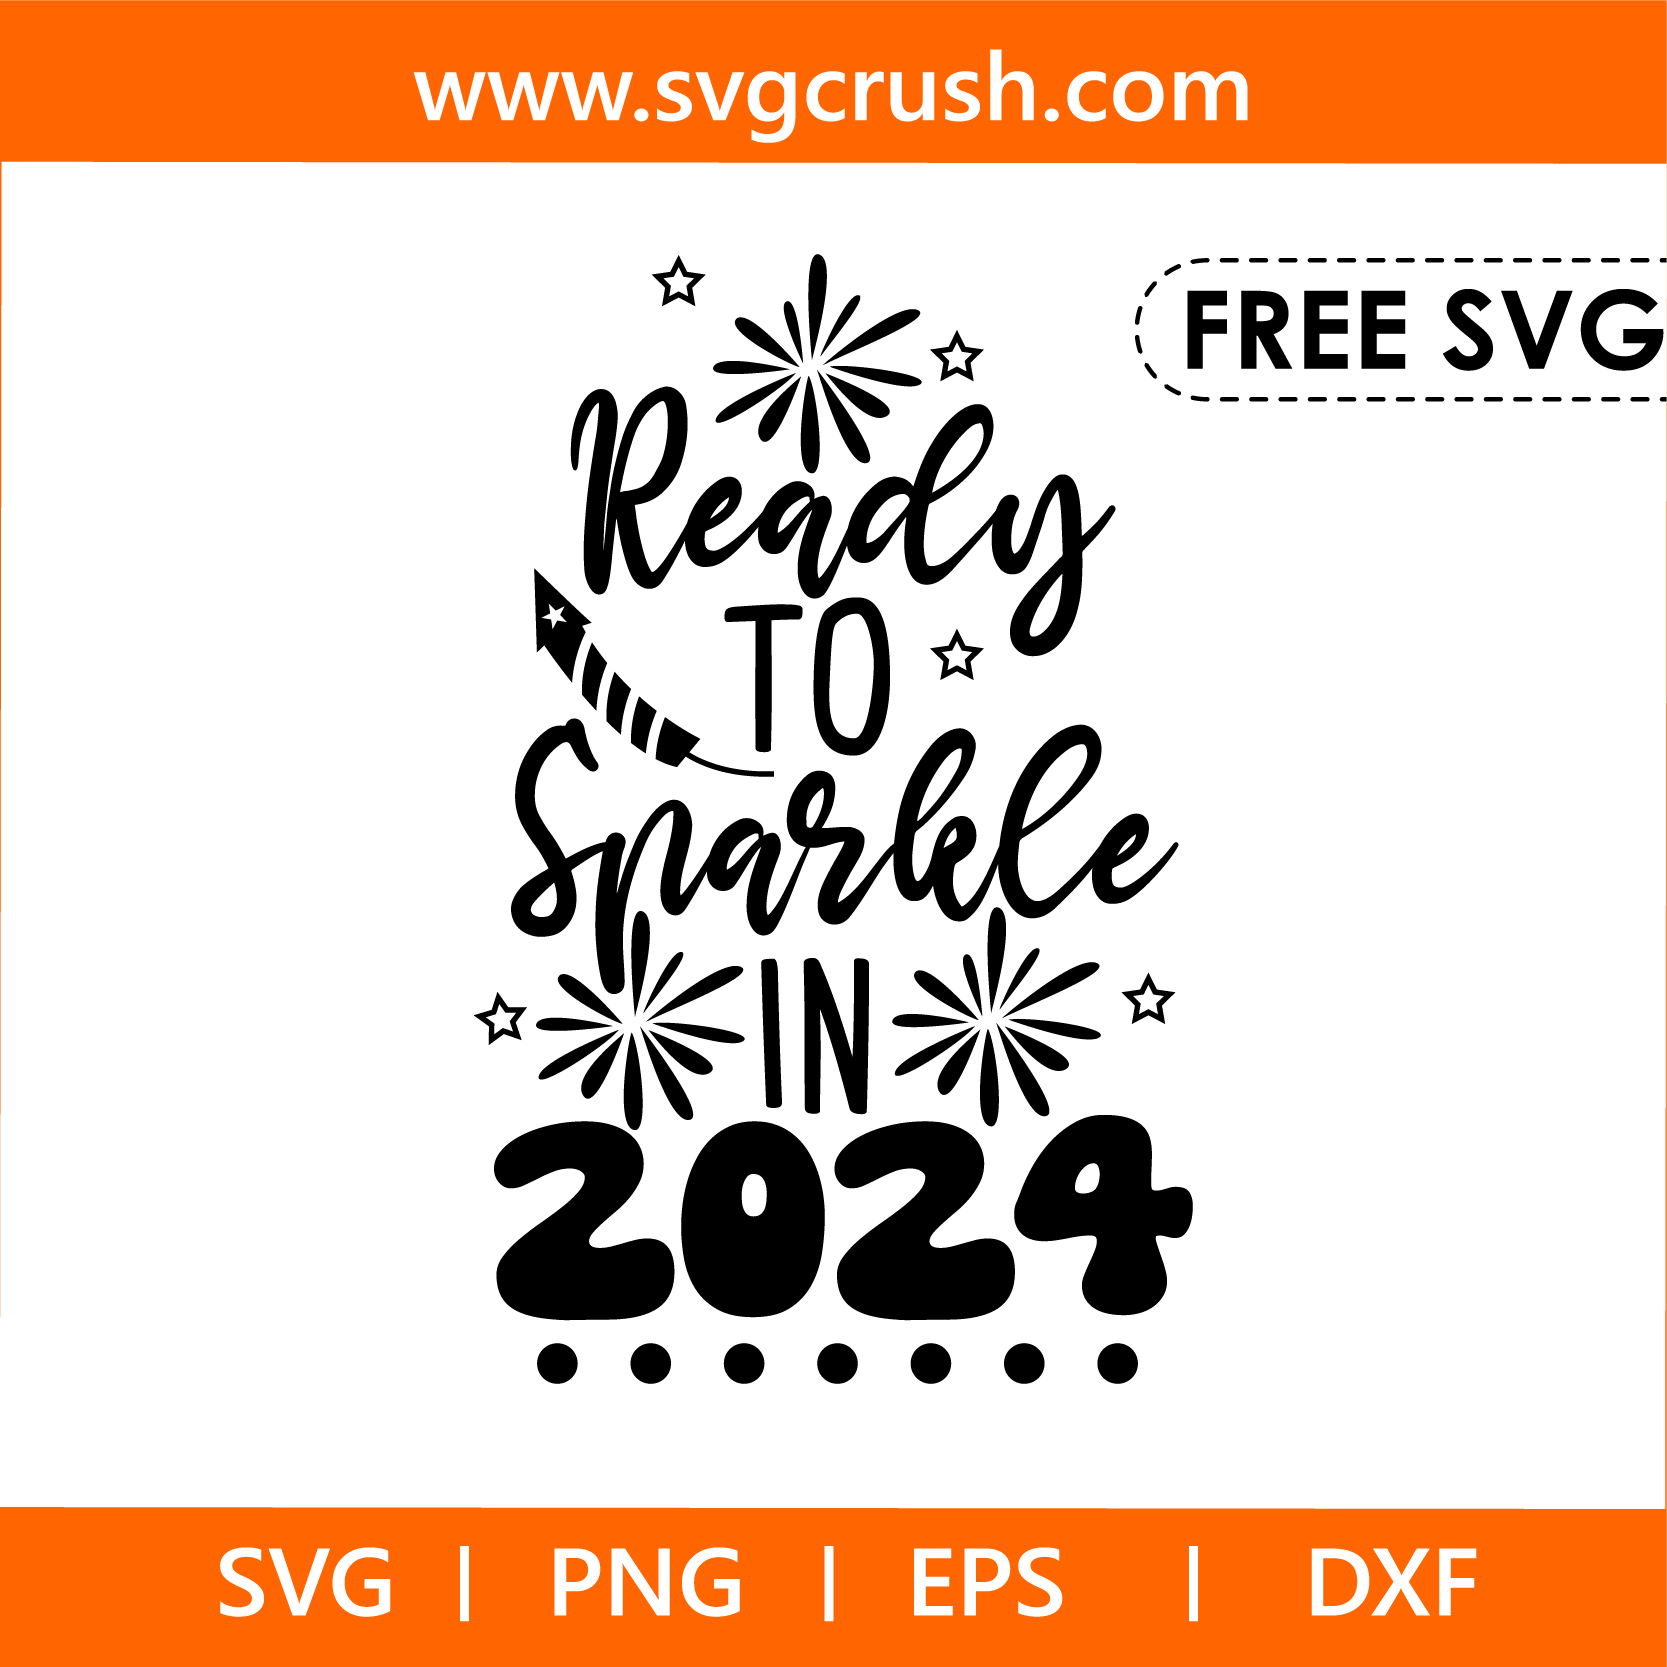 free ready-to-sparkle-in-2024-005 svg